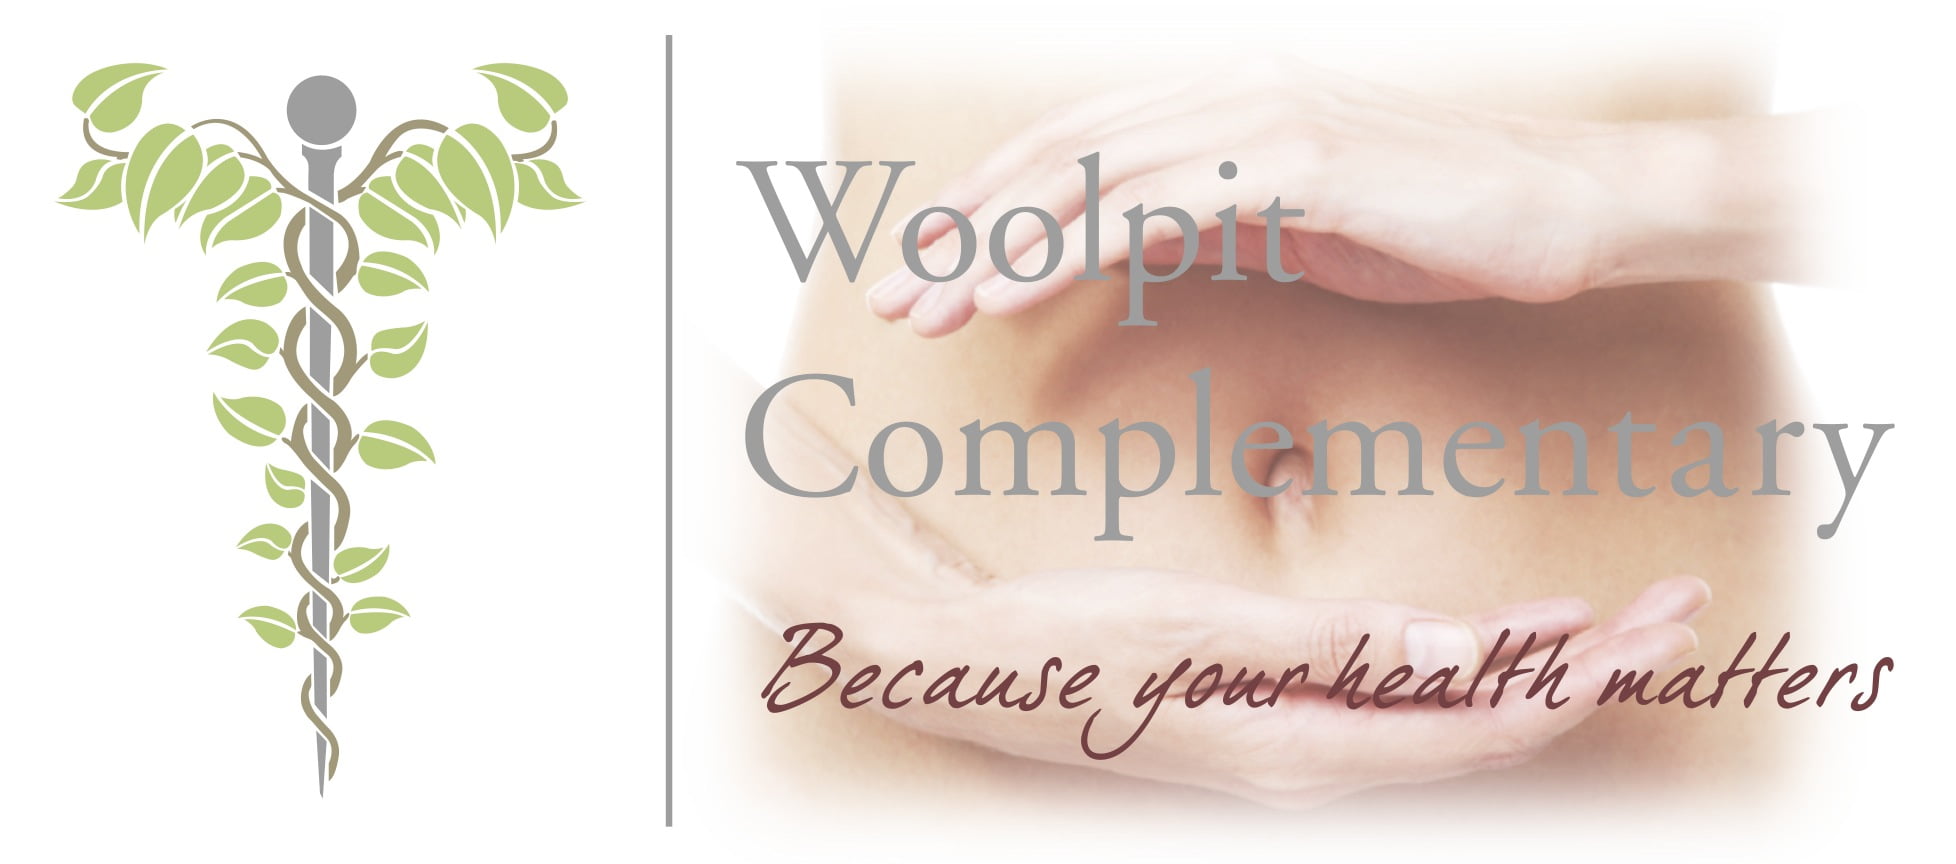 IBS Treatment, Woolpit Complementary, Bury St Edmunds